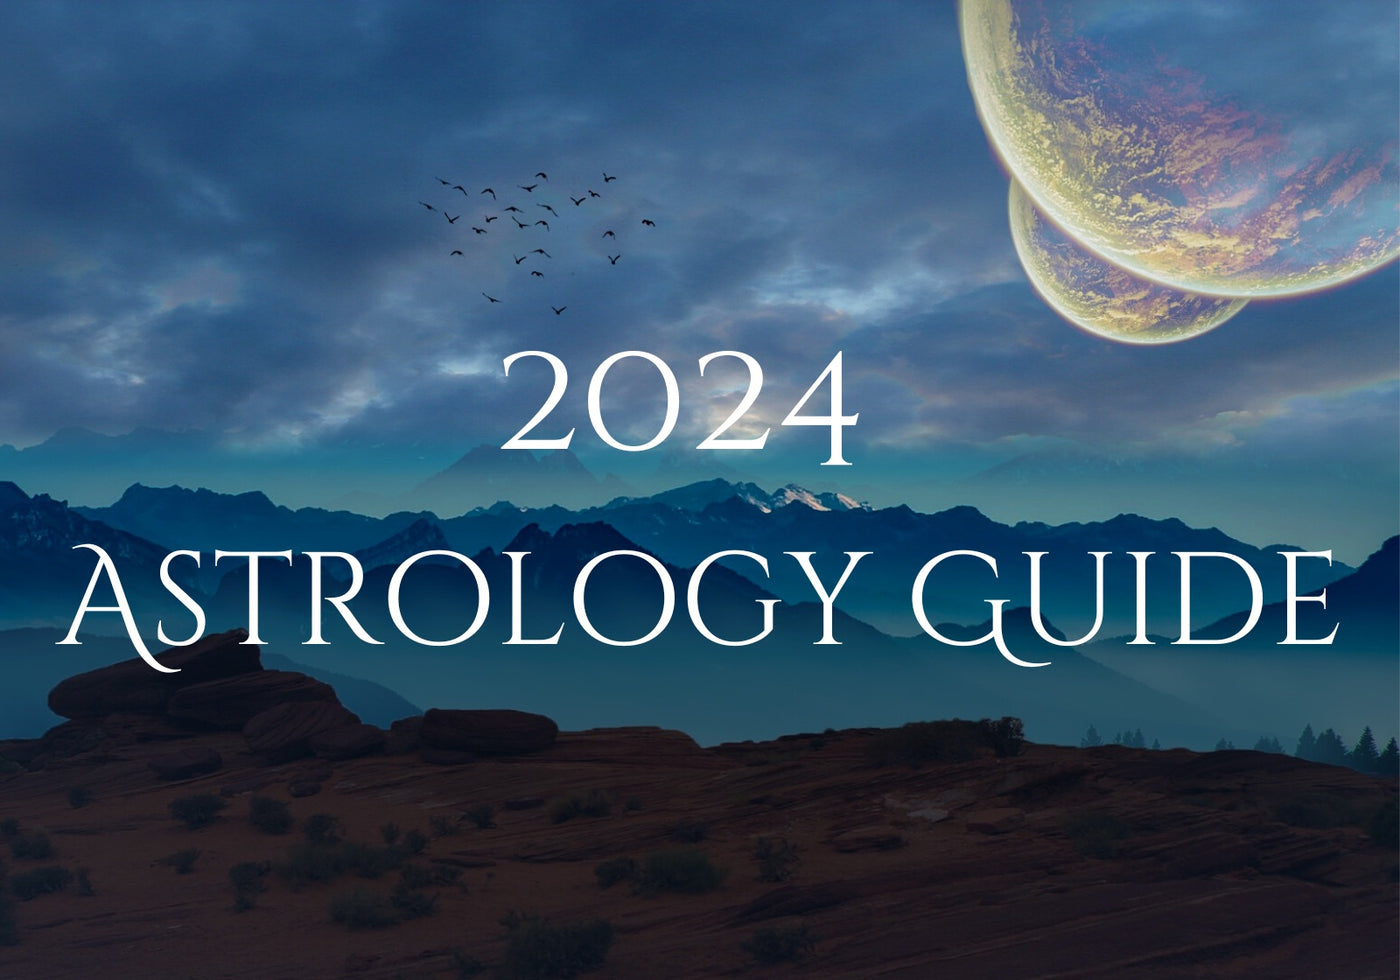 2024 ASTROLOGY GUIDE